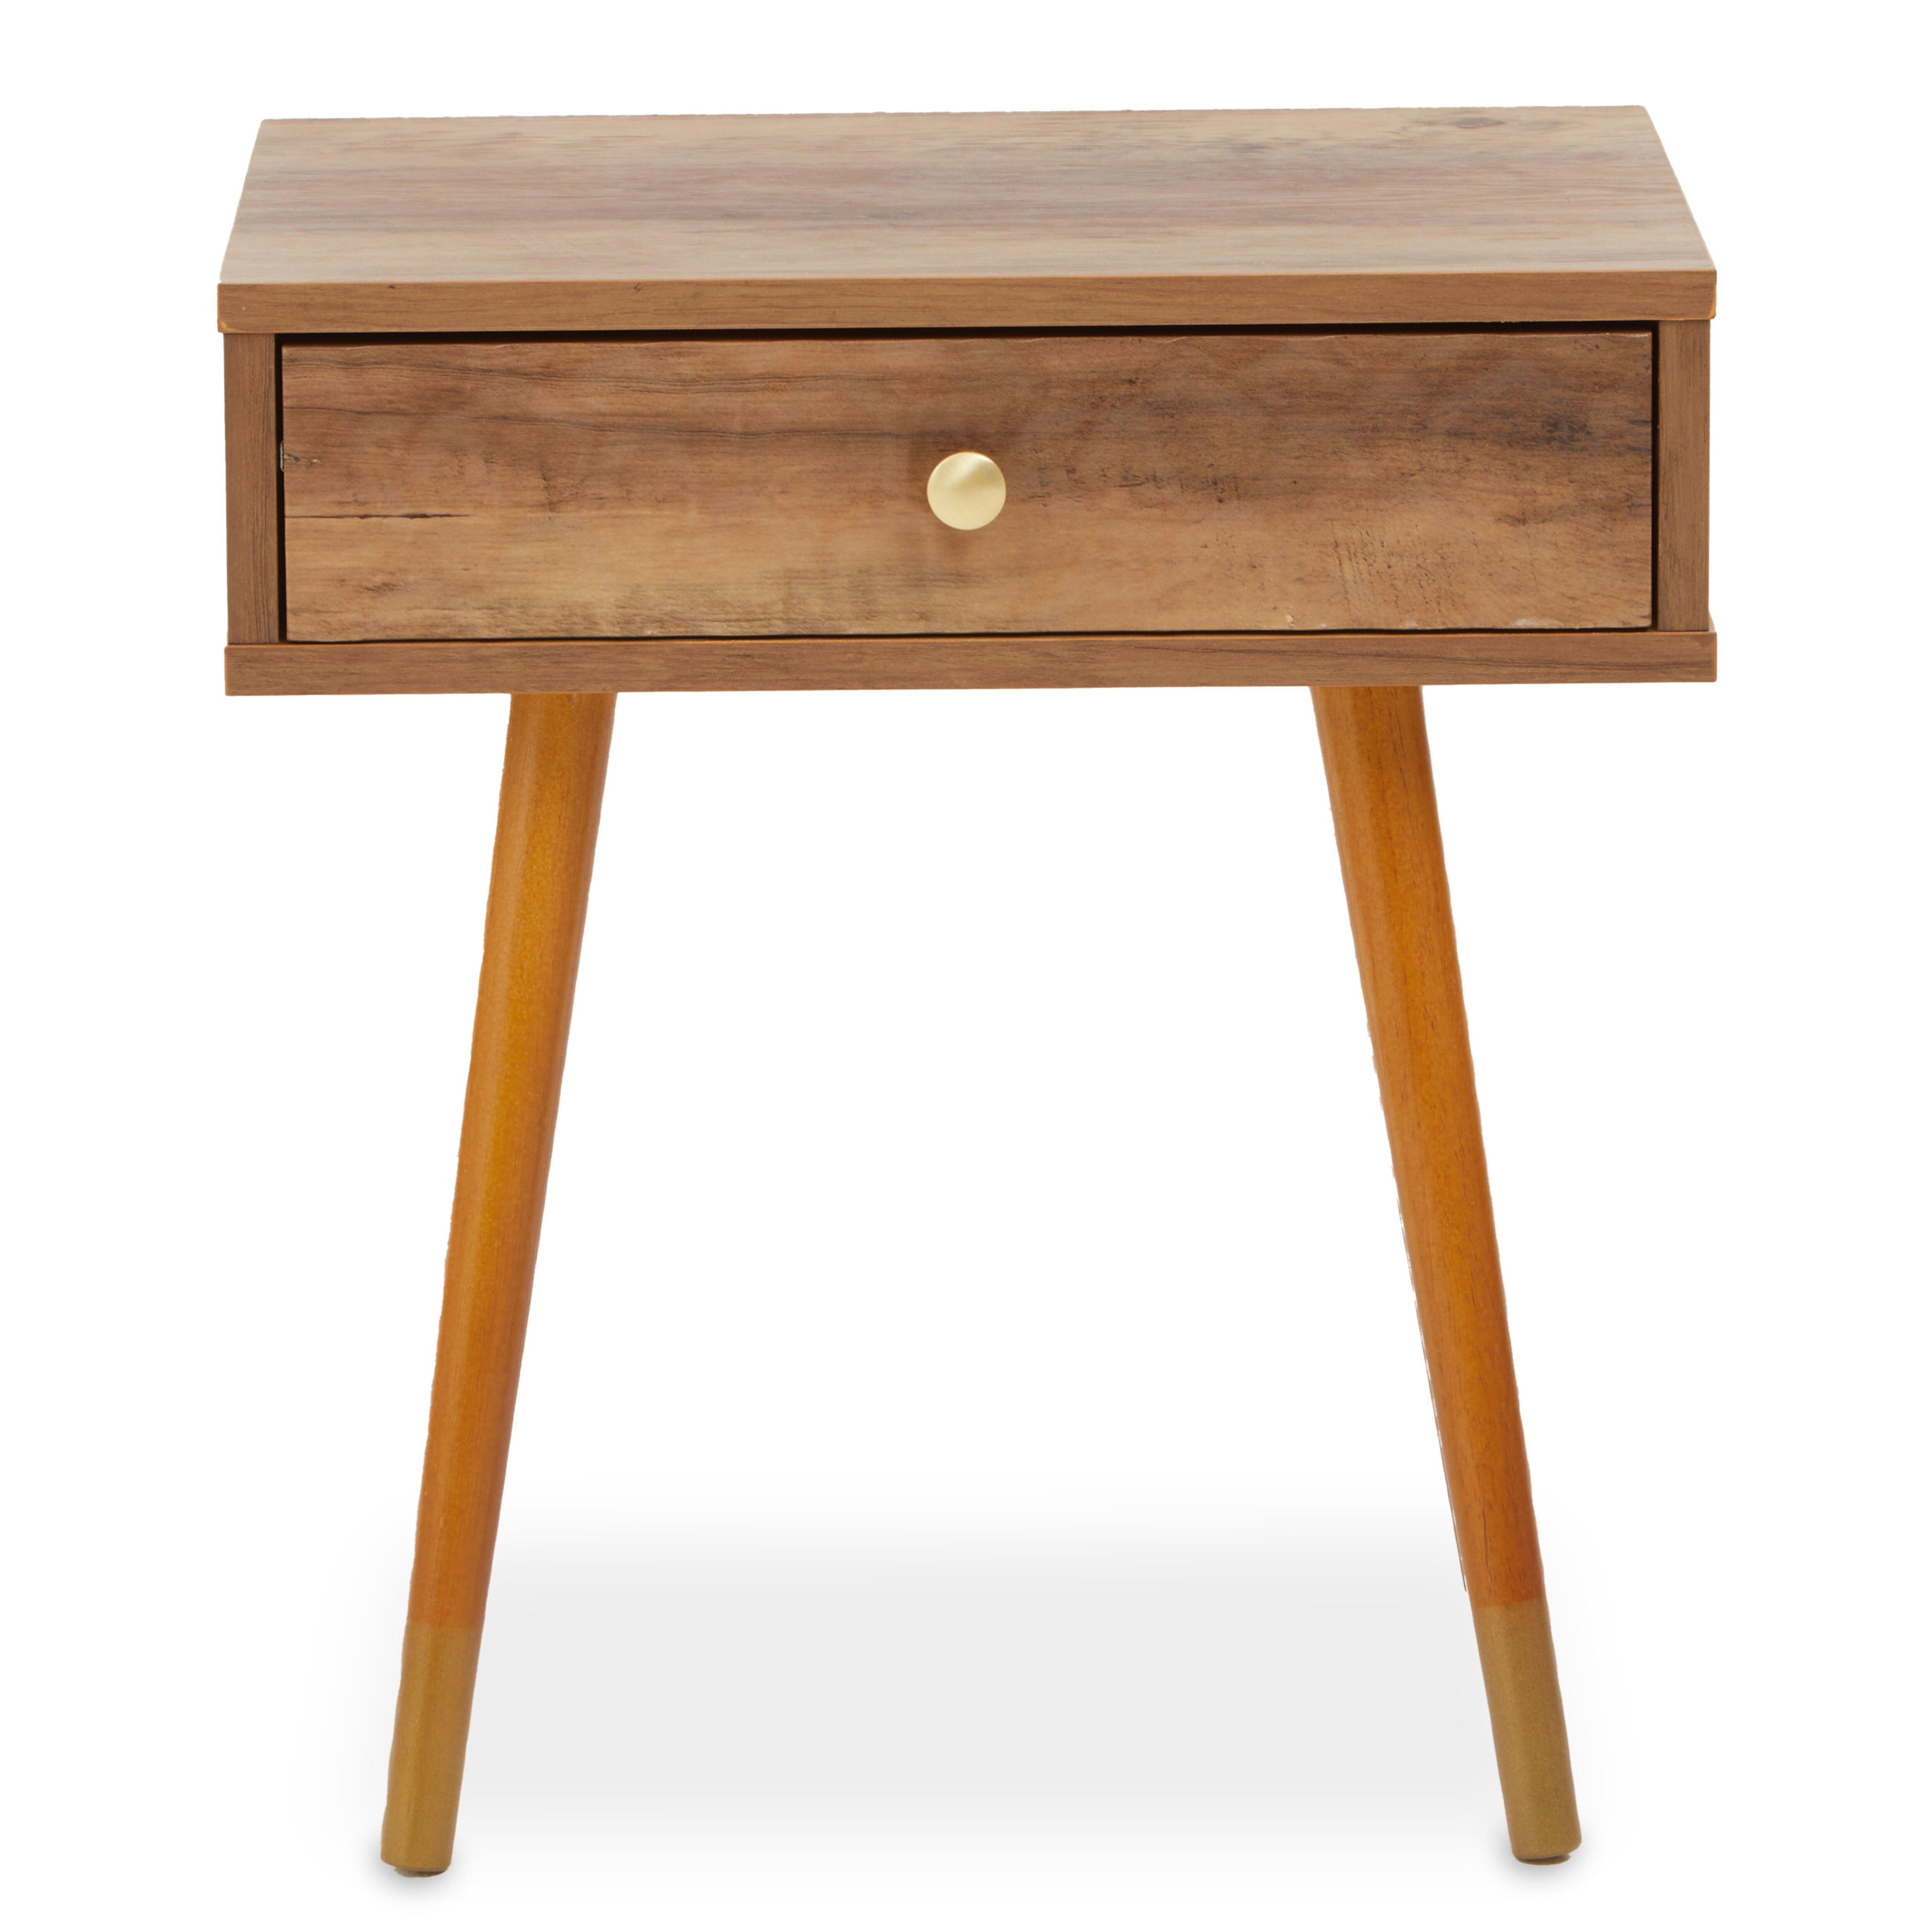 Frida Small Side Table - image 1